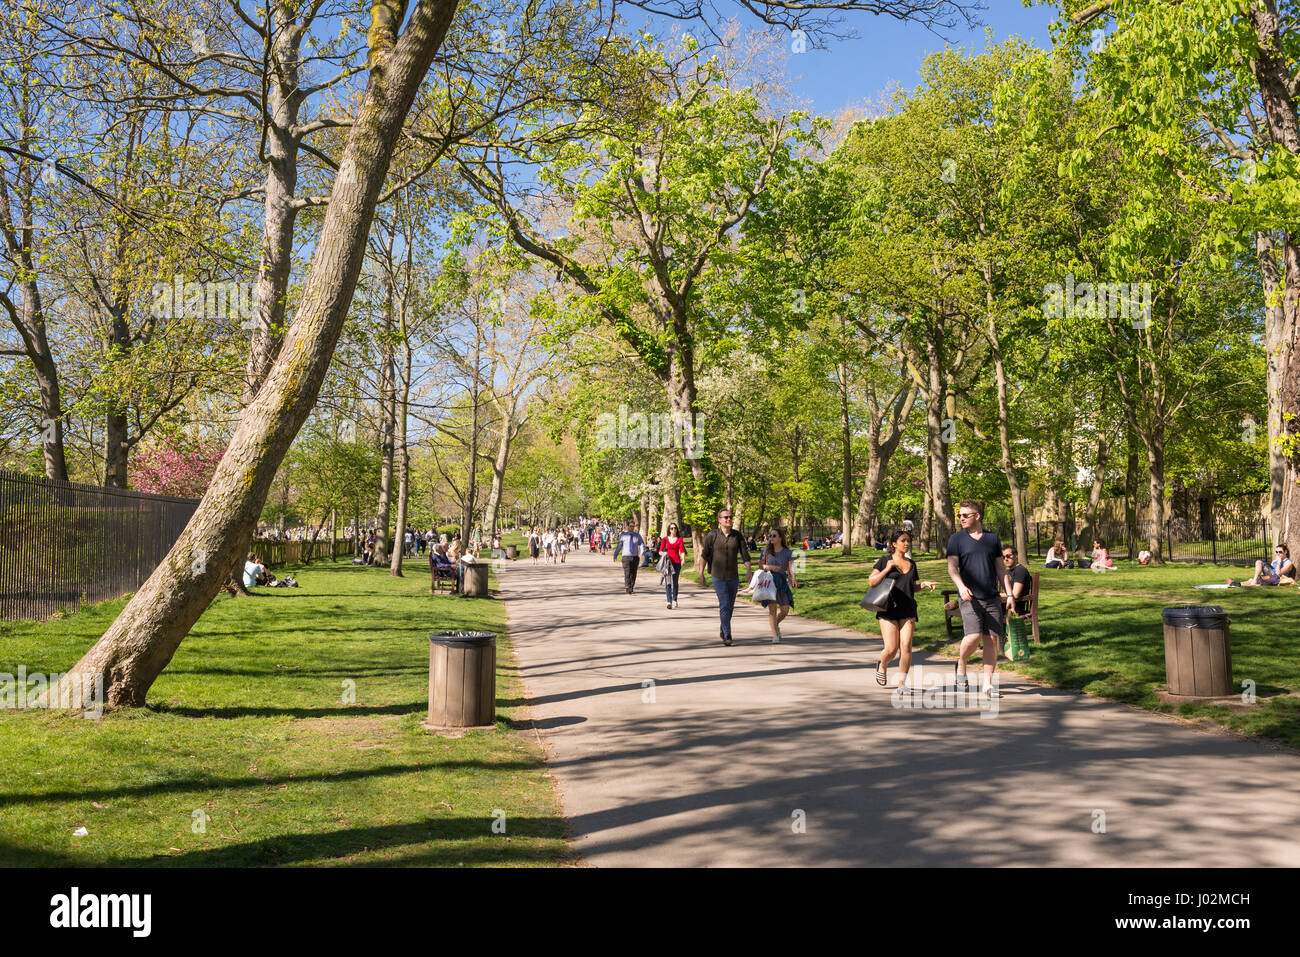 London, UK. 9th April 2017. People enjoying the sunny warm day in Holland Park, Kensington and Chelsea, London, UK. Temperatures have risen to 77F (25C) today, double the average for April, prompting a rush of Londoners to public parks.Credit: Nicola Ferrari/Alamy Live News. Stock Photo